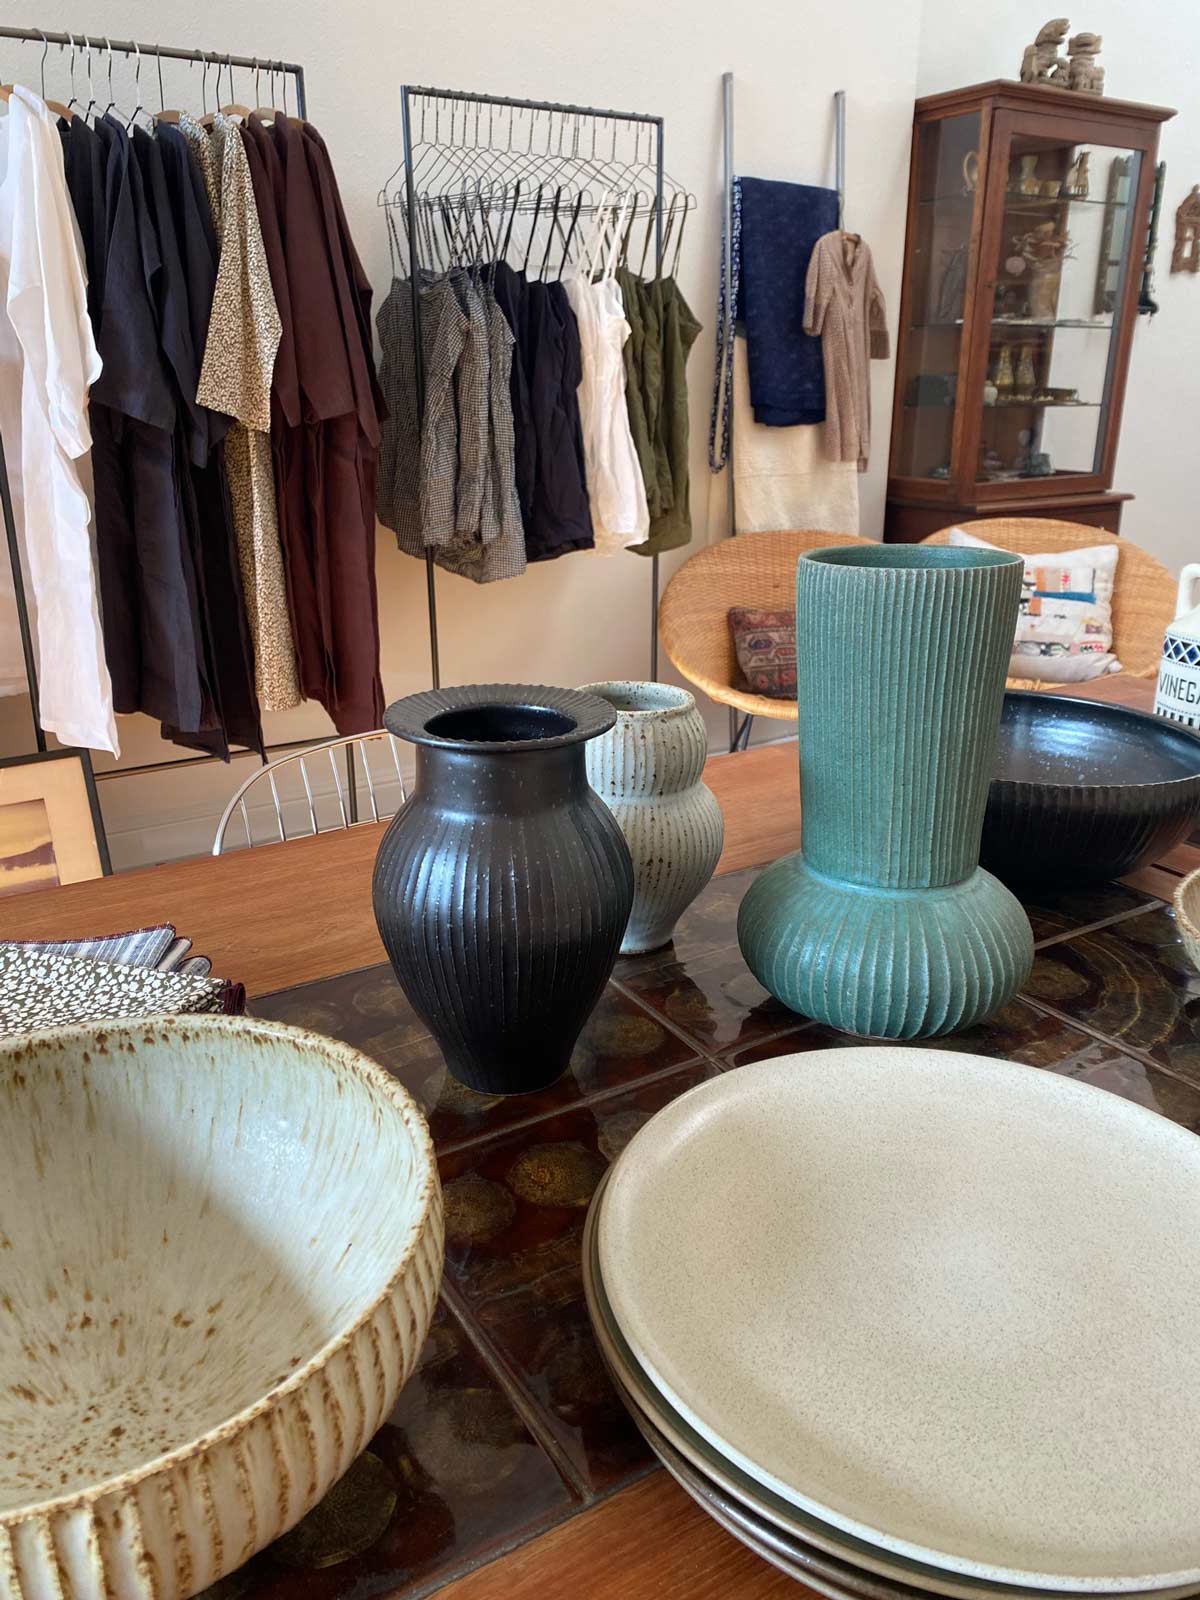 pottery on a wooden table with clothing behind on racks in the jess brown shop